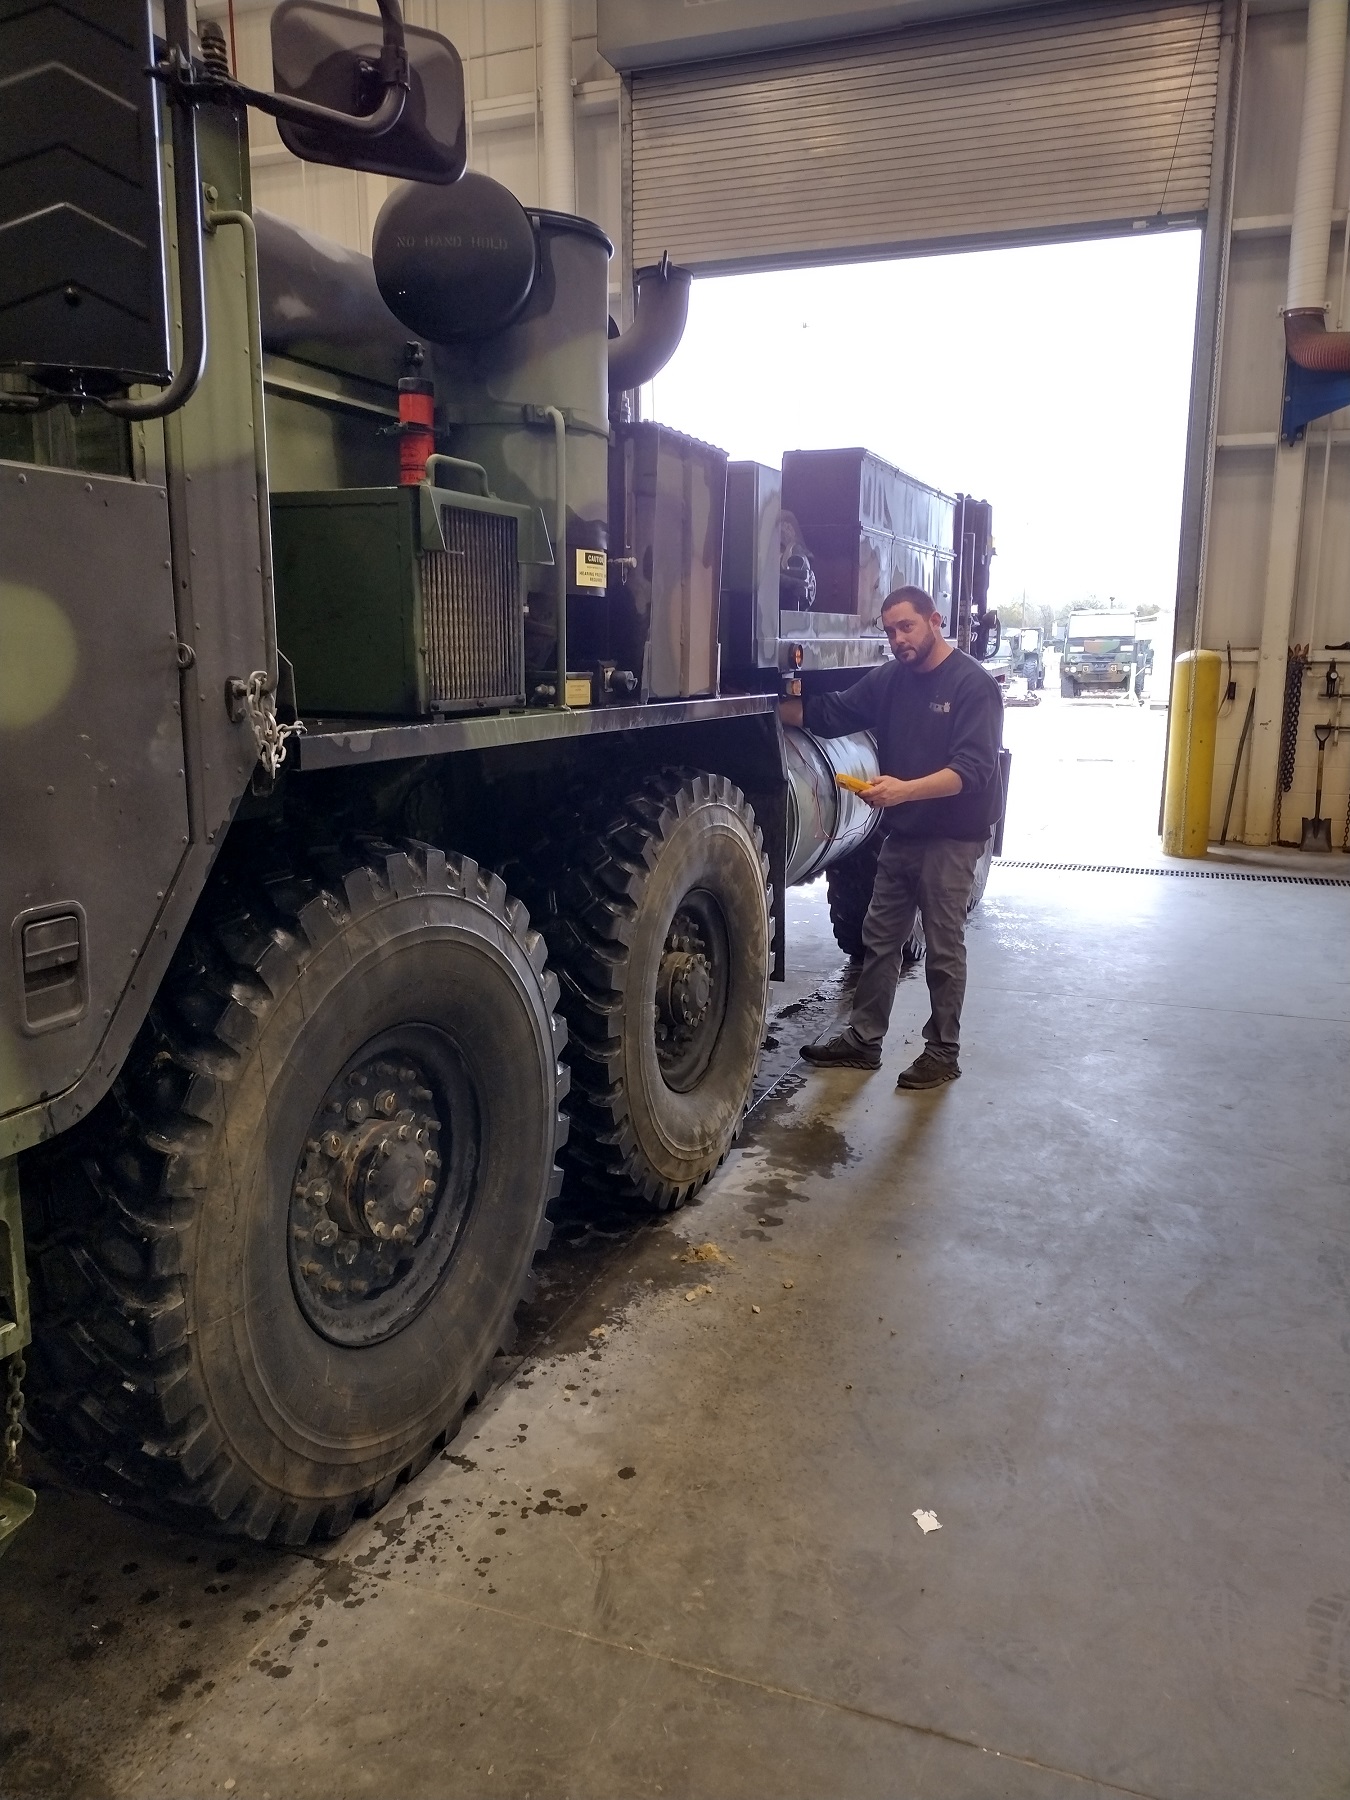 Ryan Cowles, Heavy Mobile Technician, Recovery and Munitions Division TACOM Fleet Management Expansion (FMX) office, North Range, Ft Lee, VA